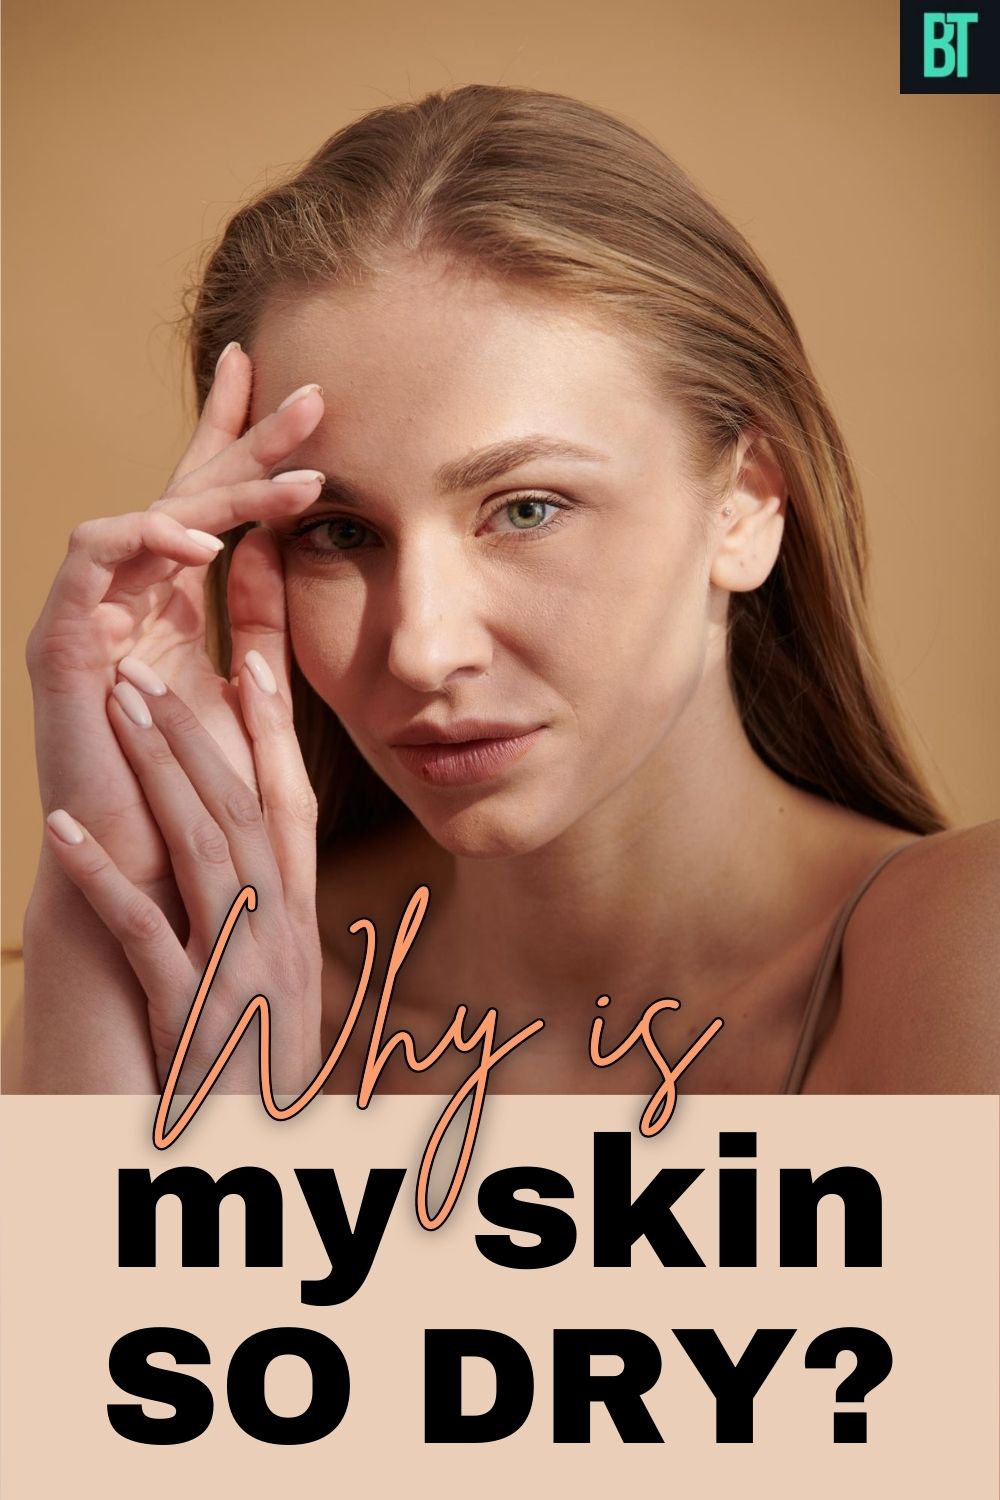 Why is my skin so dry?